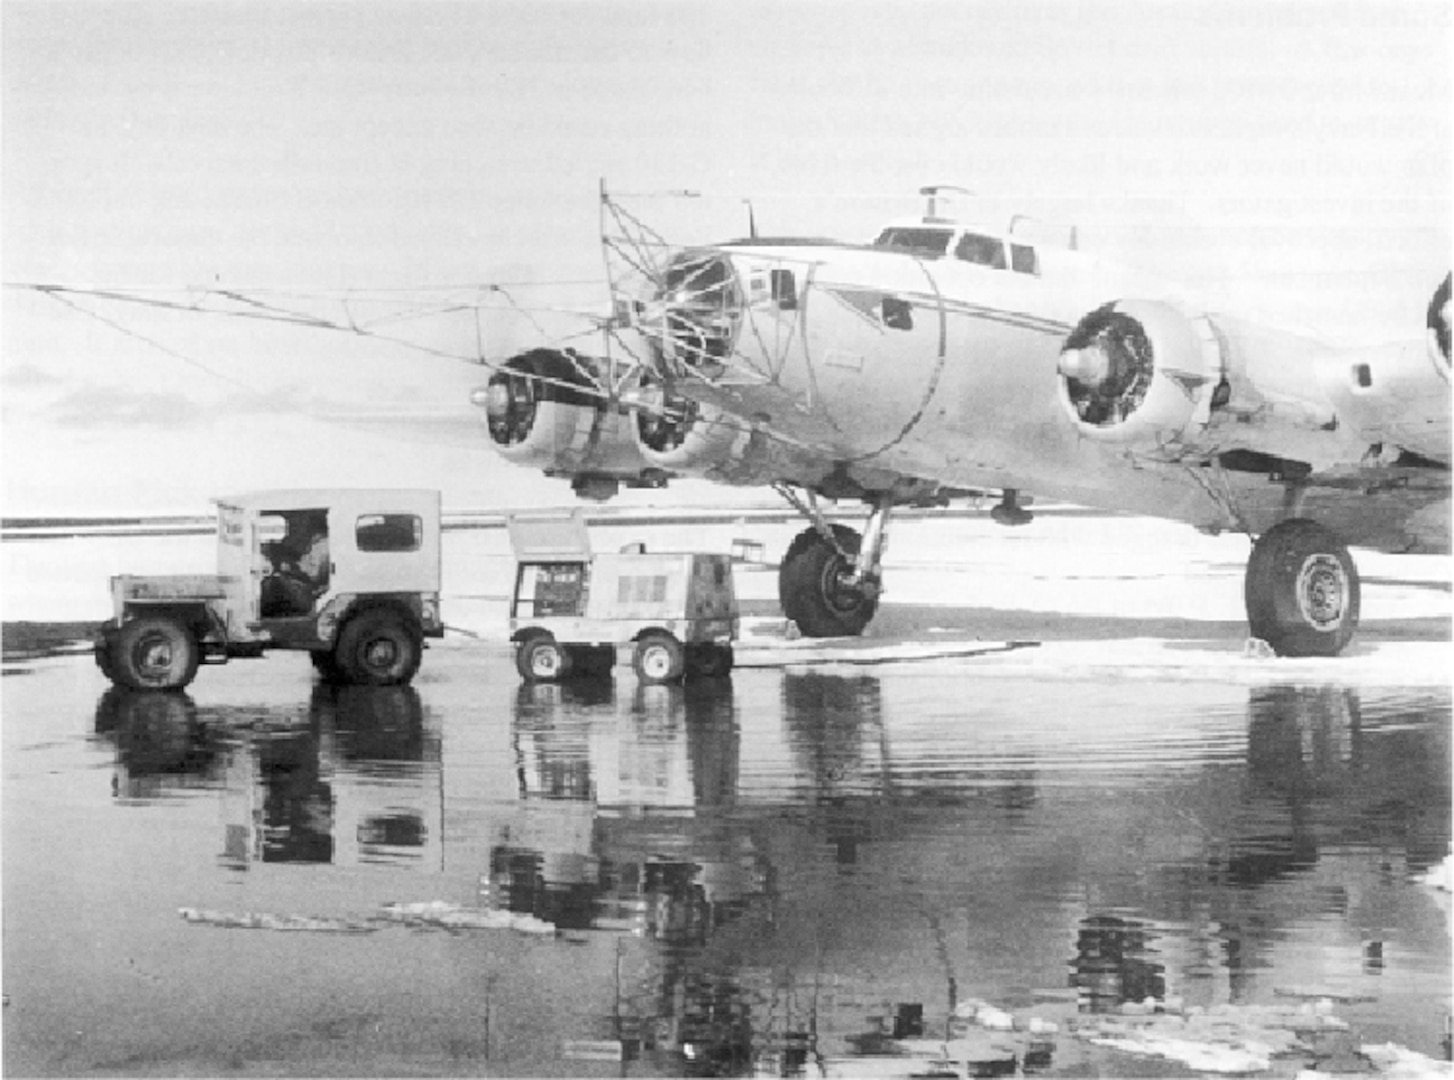 The B-17 bomber was modified to perform the Skyhook process, which is a way by which a flying aircraft can "grab" a stationary object sitting on the ground. Robert Fulton was the inventor of the Skyhook system, which was also known as the Surface-To-Air-Recovery System. Photo courtesy of CIA. Intermountain Aviation's B-17 at Point Barrow, May 1962. (Credit: Robert E. Fulton)